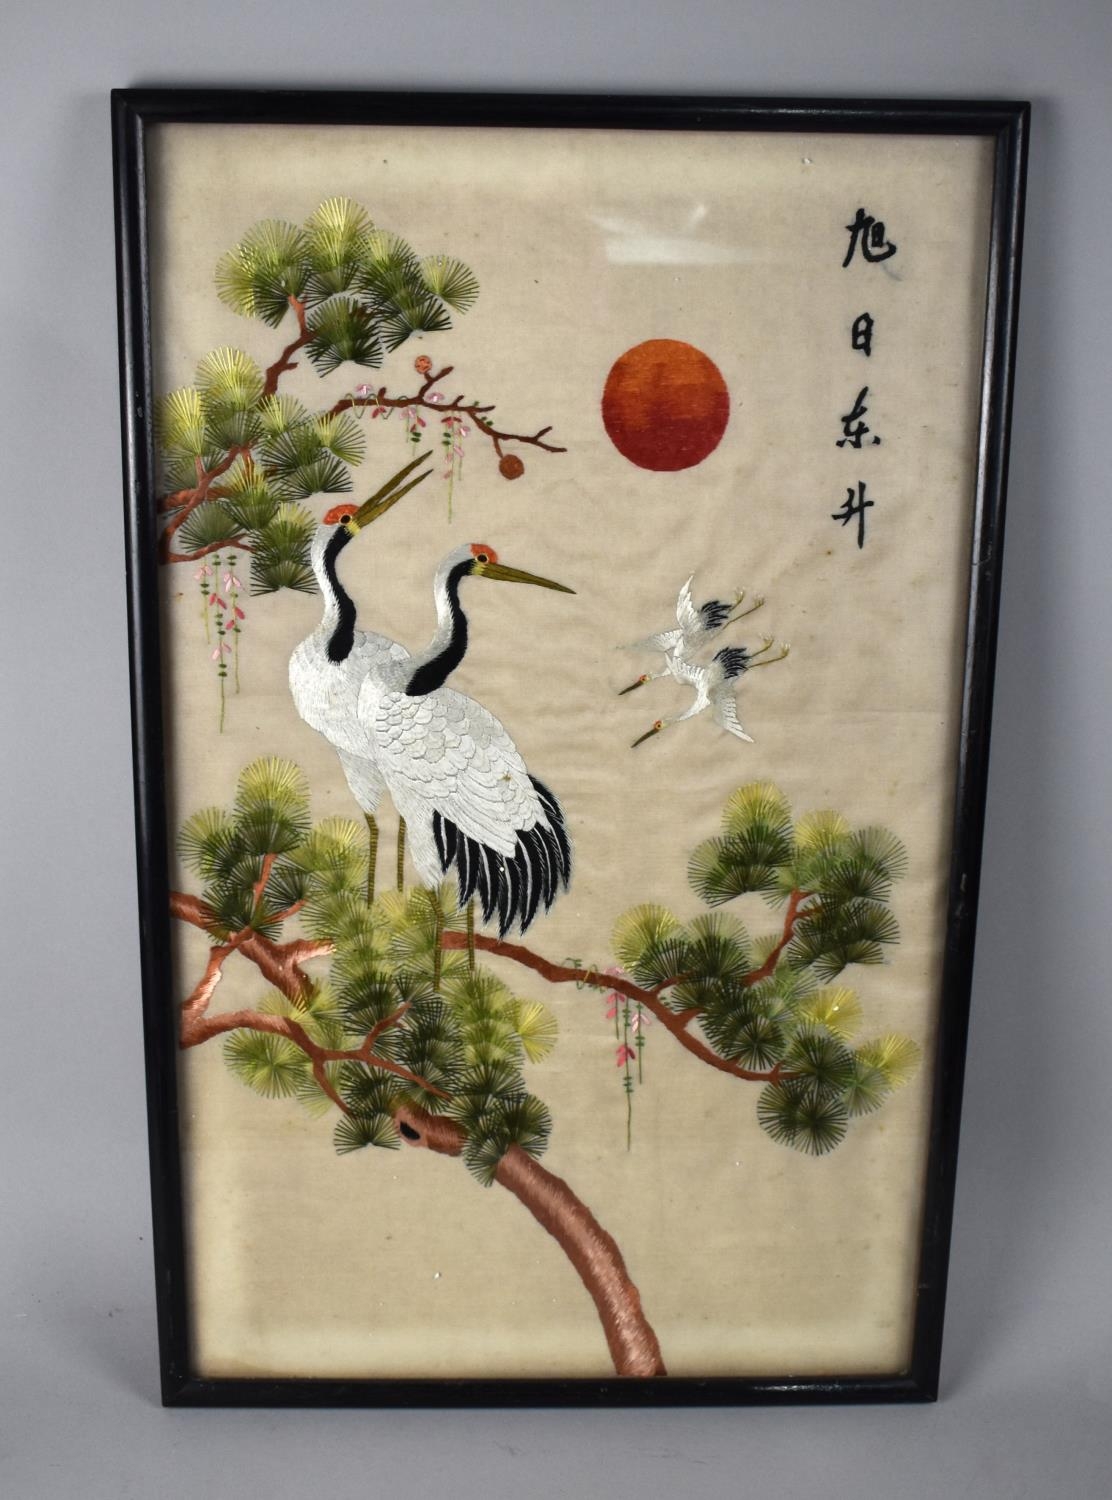 A Framed Oriental Embroidery Depicting Cranes